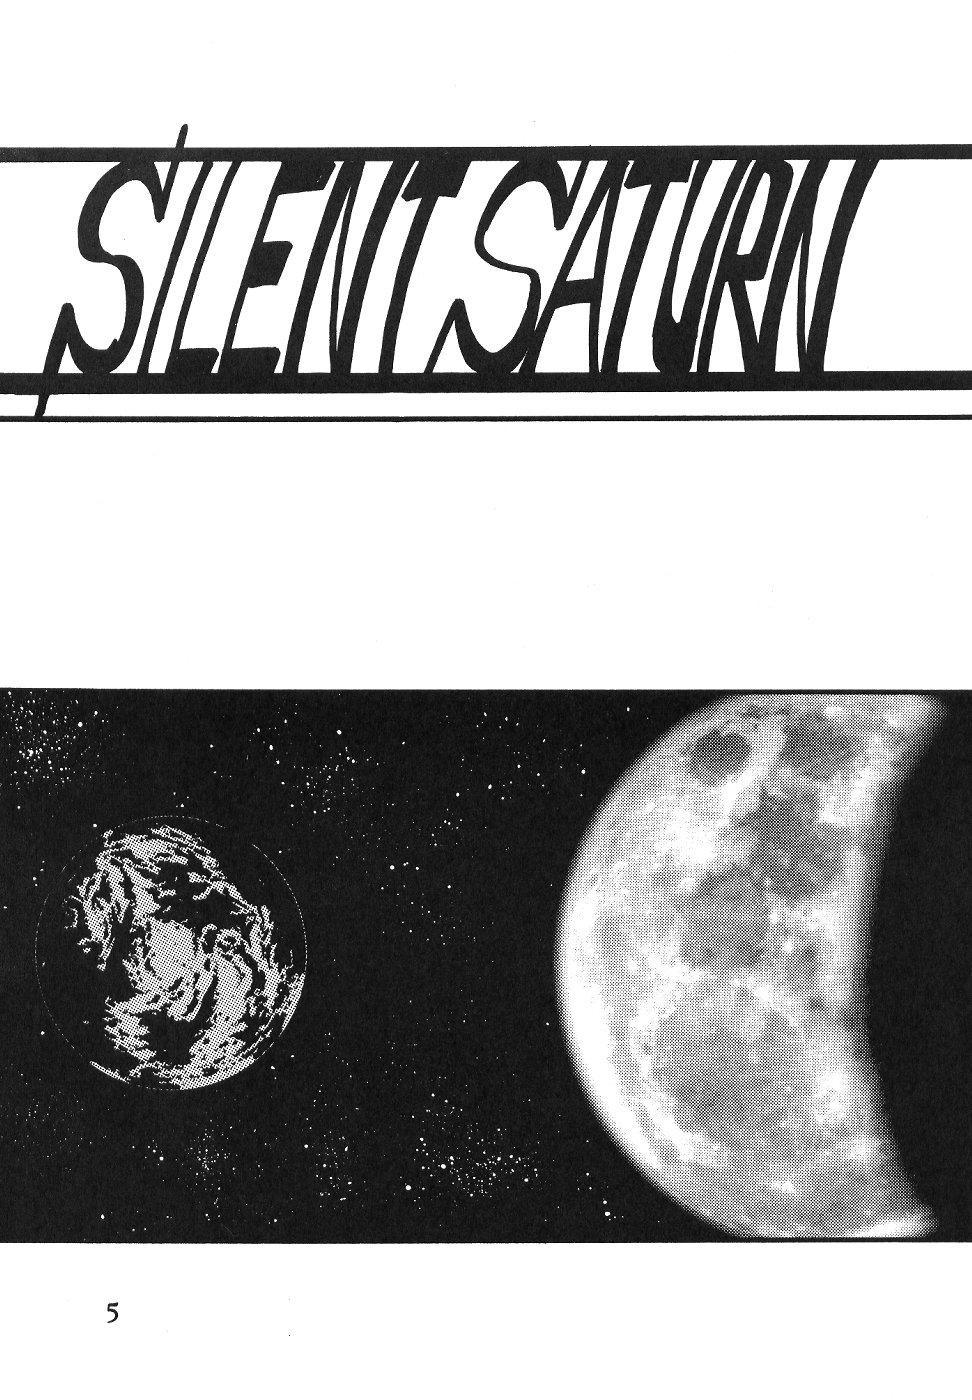 Amature Sex Silent Saturn SS vol. 1 - Sailor moon Glam - Page 5